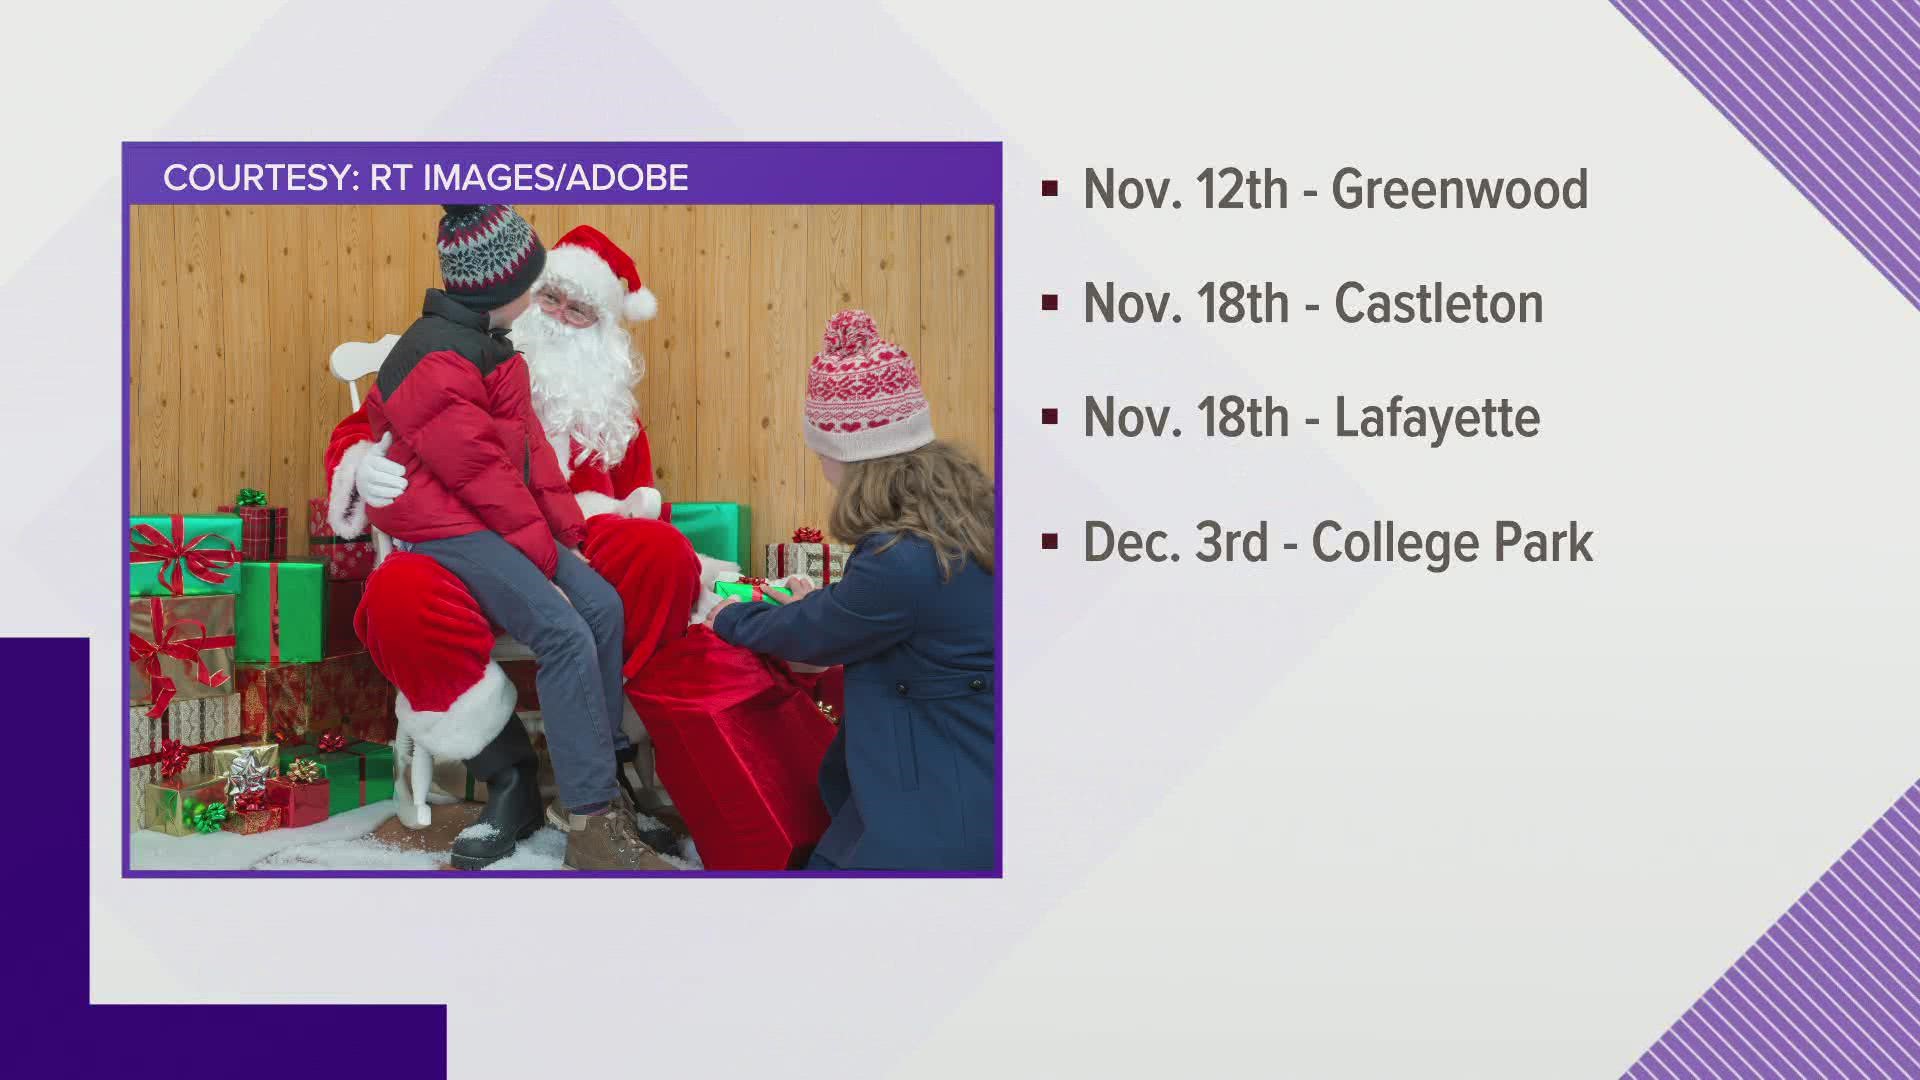 The jolly old elf will be visiting Castleton Square Mall, Greenwood Park Mall Tippecanoe Mall and College Mall for the holidays.